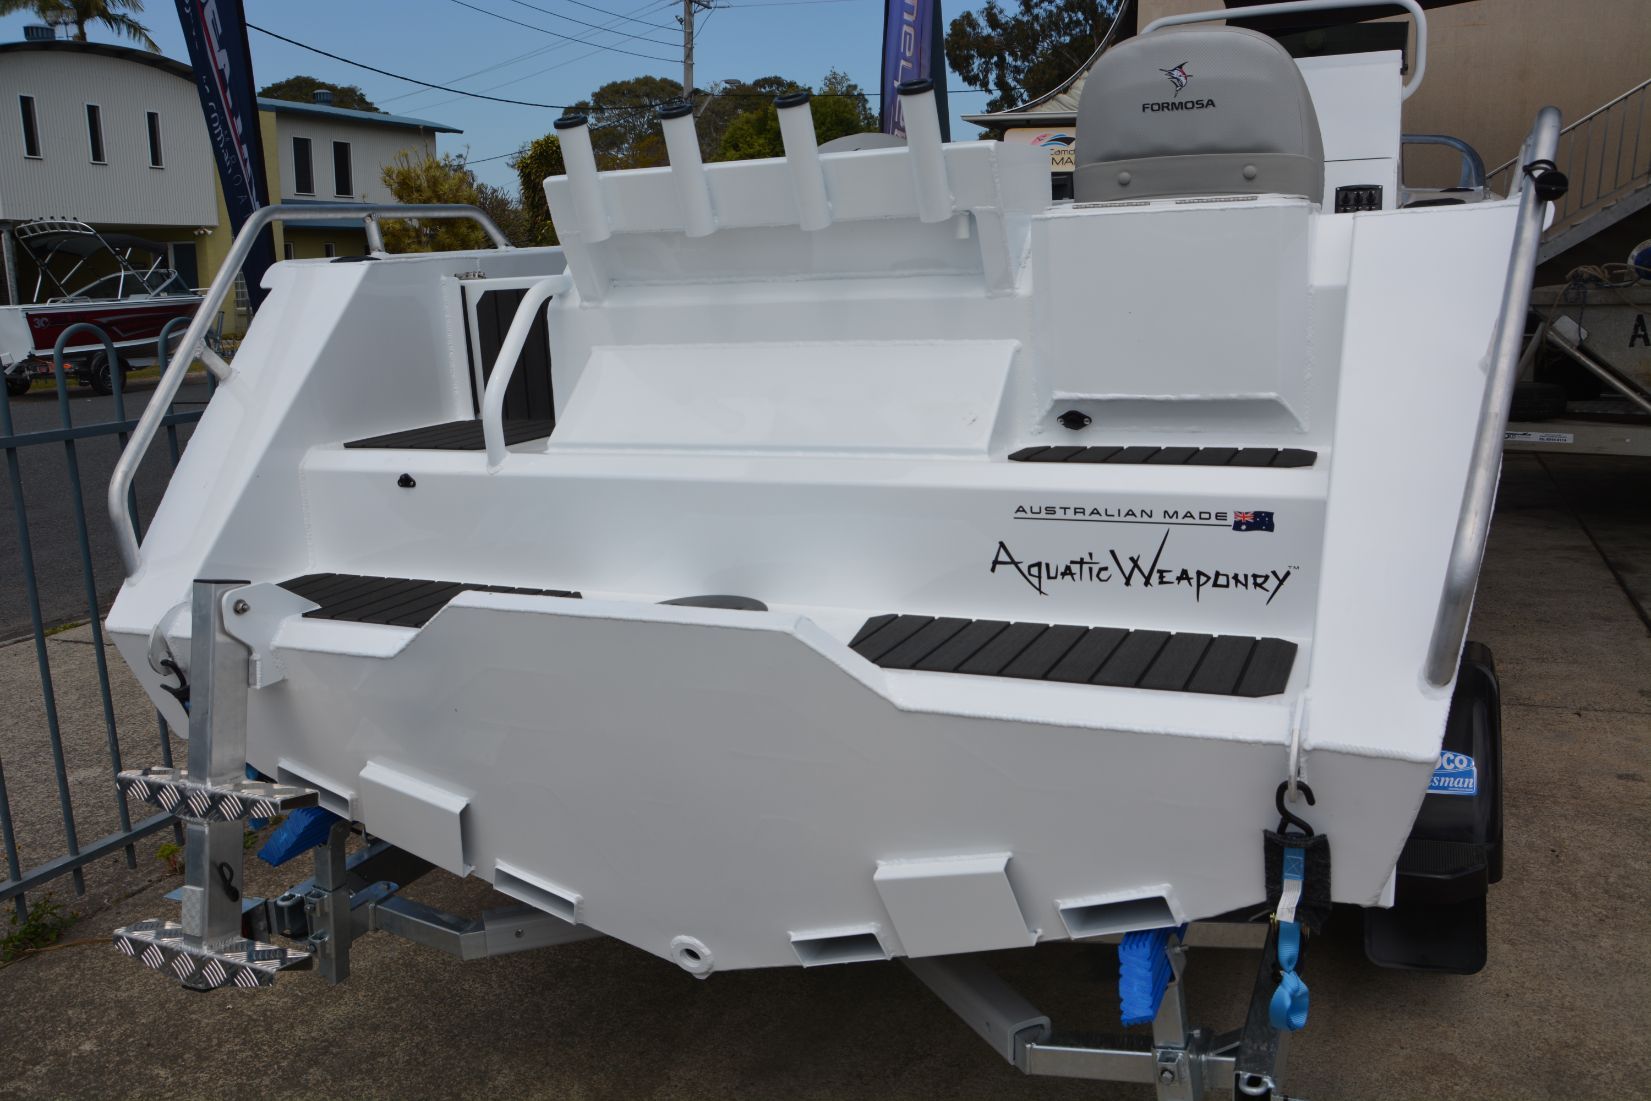 Formosa SRT 520 Classic Side Console — Boat Sales in Port Macquarie, NSW